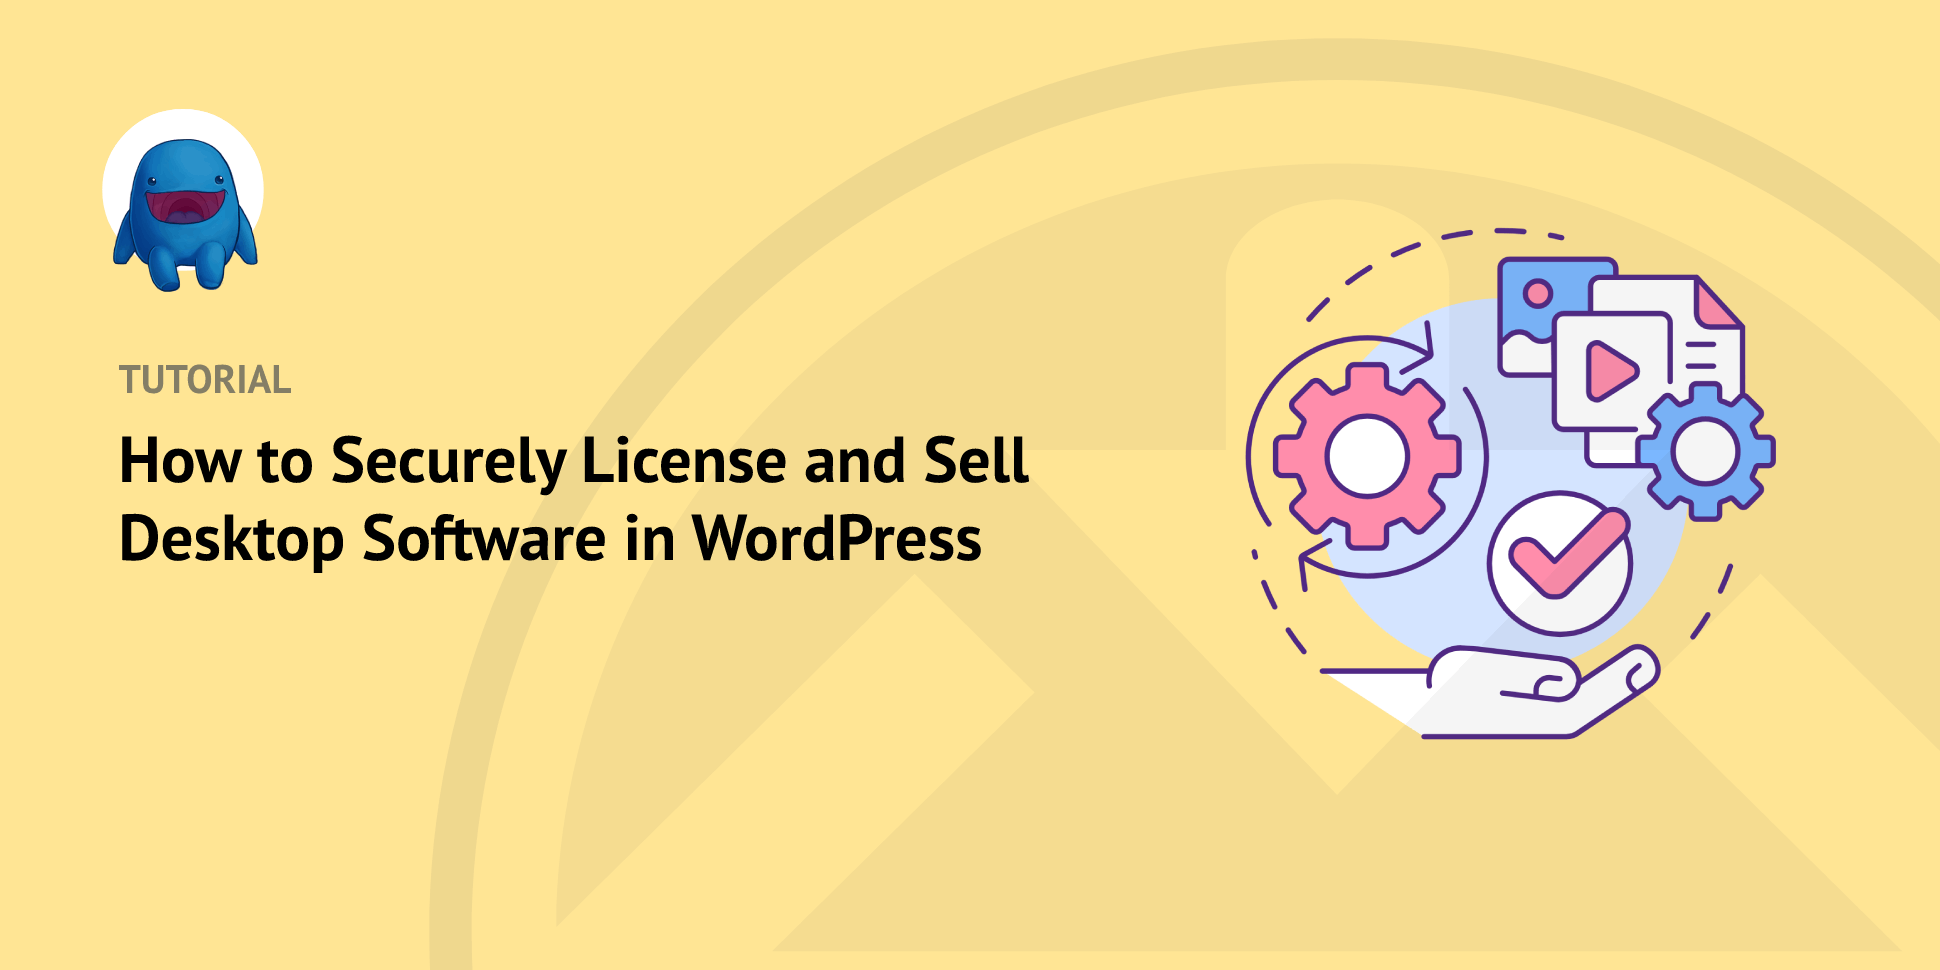 How to Securely License and Sell Desktop Software in WordPress